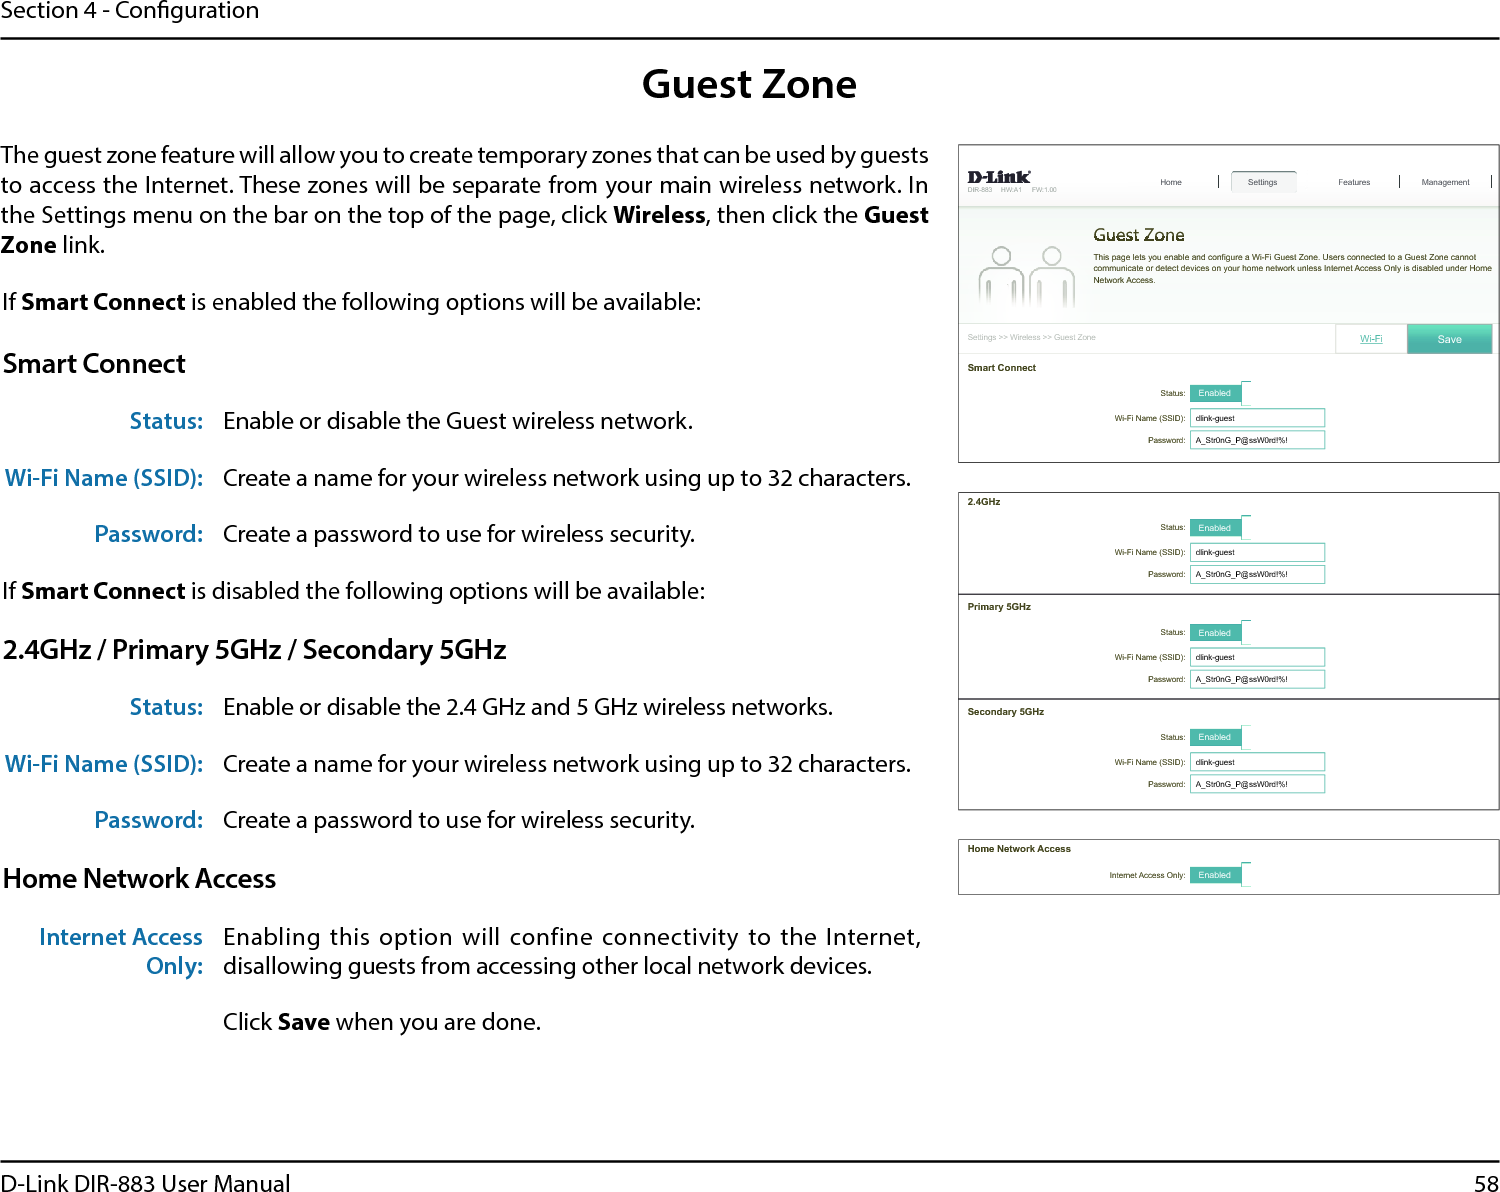 58D-Link DIR-883 User ManualSection 4 - CongurationGuest ZoneThe guest zone feature will allow you to create temporary zones that can be used by guests to access the Internet. These zones will be separate from your main wireless network. In the Settings menu on the bar on the top of the page, click Wireless, then click the Guest Zone link.If Smart Connect is enabled the following options will be available:Smart ConnectStatus: Enable or disable the Guest wireless network.Wi-Fi Name (SSID): Create a name for your wireless network using up to 32 characters. Password: Create a password to use for wireless security. If Smart Connect is disabled the following options will be available:2.4GHz / Primary 5GHz / Secondary 5GHzStatus: Enable or disable the 2.4 GHz and 5 GHz wireless networks.Wi-Fi Name (SSID): Create a name for your wireless network using up to 32 characters. Password: Create a password to use for wireless security. Home Network AccessInternet Access Only:Enabling  this  option  will  confine  connectivity  to  the  Internet, disallowing guests from accessing other local network devices.Click Save when you are done.&apos;,5 +:$ ):6HWWLQJV!!:LUHOHVV!!*XHVW=RQH6HWWLQJV+RPHGuest ZoneFeatures Management7KLVSDJHOHWV\RXHQDEOHDQGFRQ¿JXUHD:L)L*XHVW=RQH8VHUVFRQQHFWHGWRD*XHVW=RQHFDQQRWFRPPXQLFDWHRUGHWHFWGHYLFHVRQ\RXUKRPHQHWZRUNXQOHVV,QWHUQHW$FFHVV2QO\LVGLVDEOHGXQGHU+RPH1HWZRUN$FFHVV6WDWXV Enabled:L)L1DPH66,&apos; GOLQNJXHVWPassword: $B6WUQ*B3#VV:UG6PDUW&amp;RQQHFWWi-Fi 6DYH+RPH1HWZRUN$FFHVVInternet Access Only: Enabled2.4GHz3ULPDU\*+]6WDWXV Enabled:L)L1DPH66,&apos; GOLQNJXHVWPassword: $B6WUQ*B3#VV:UG6WDWXV Enabled:L)L1DPH66,&apos; GOLQNJXHVWPassword: $B6WUQ*B3#VV:UG6HFRQGDU\*+]6WDWXV Enabled:L)L1DPH66,&apos; GOLQNJXHVWPassword: $B6WUQ*B3#VV:UG